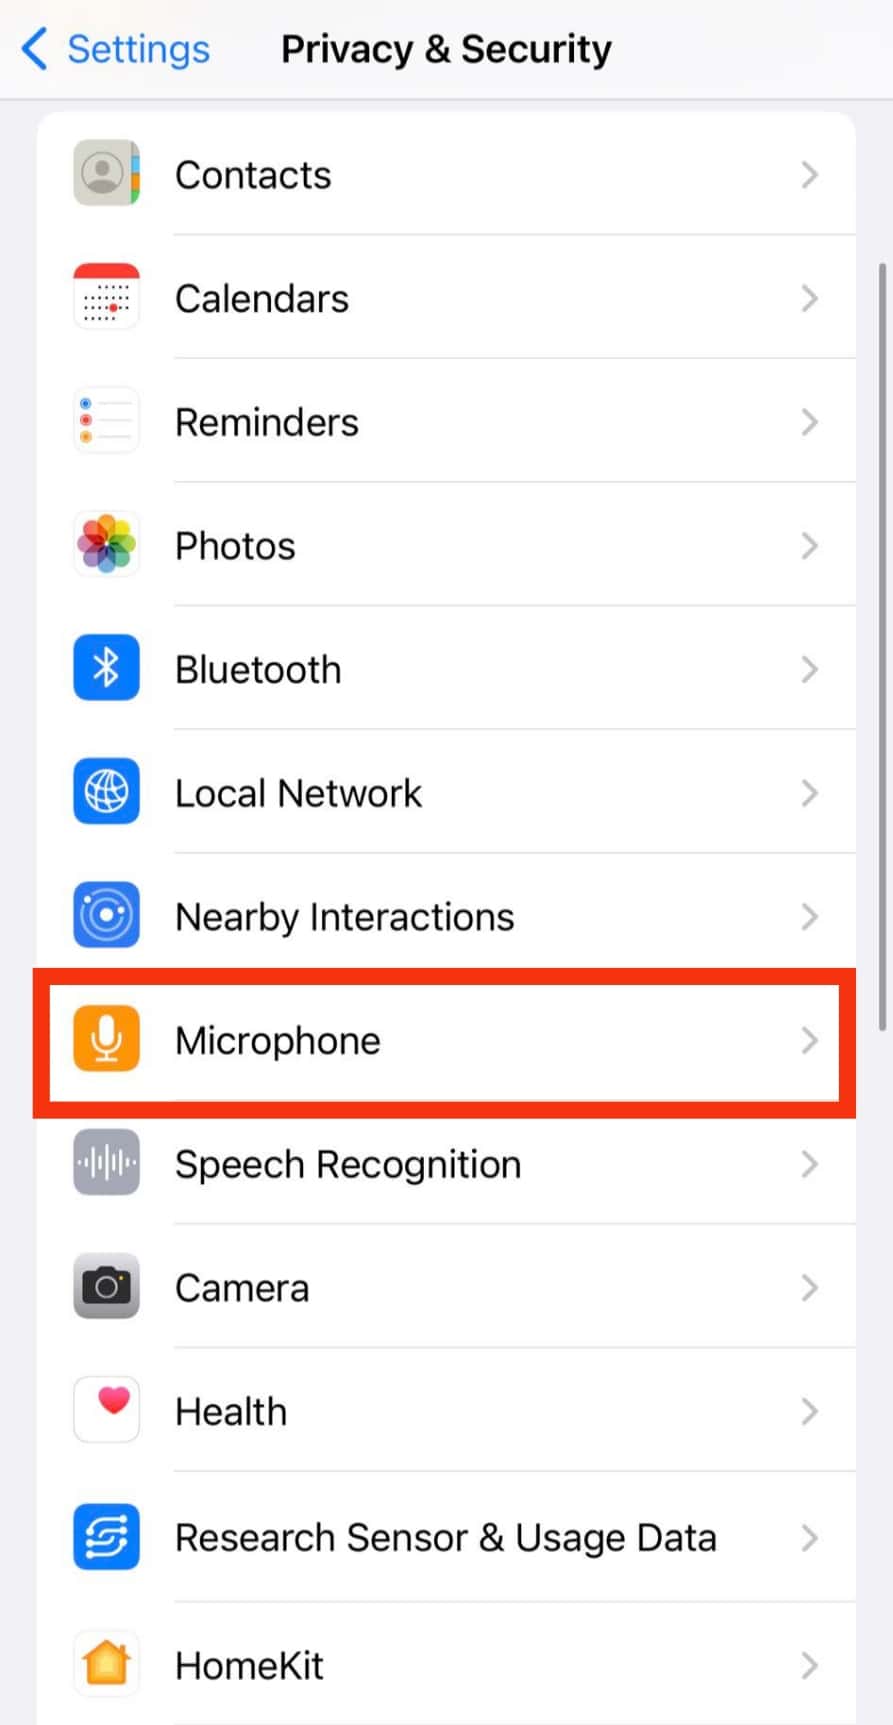 Select Microphone